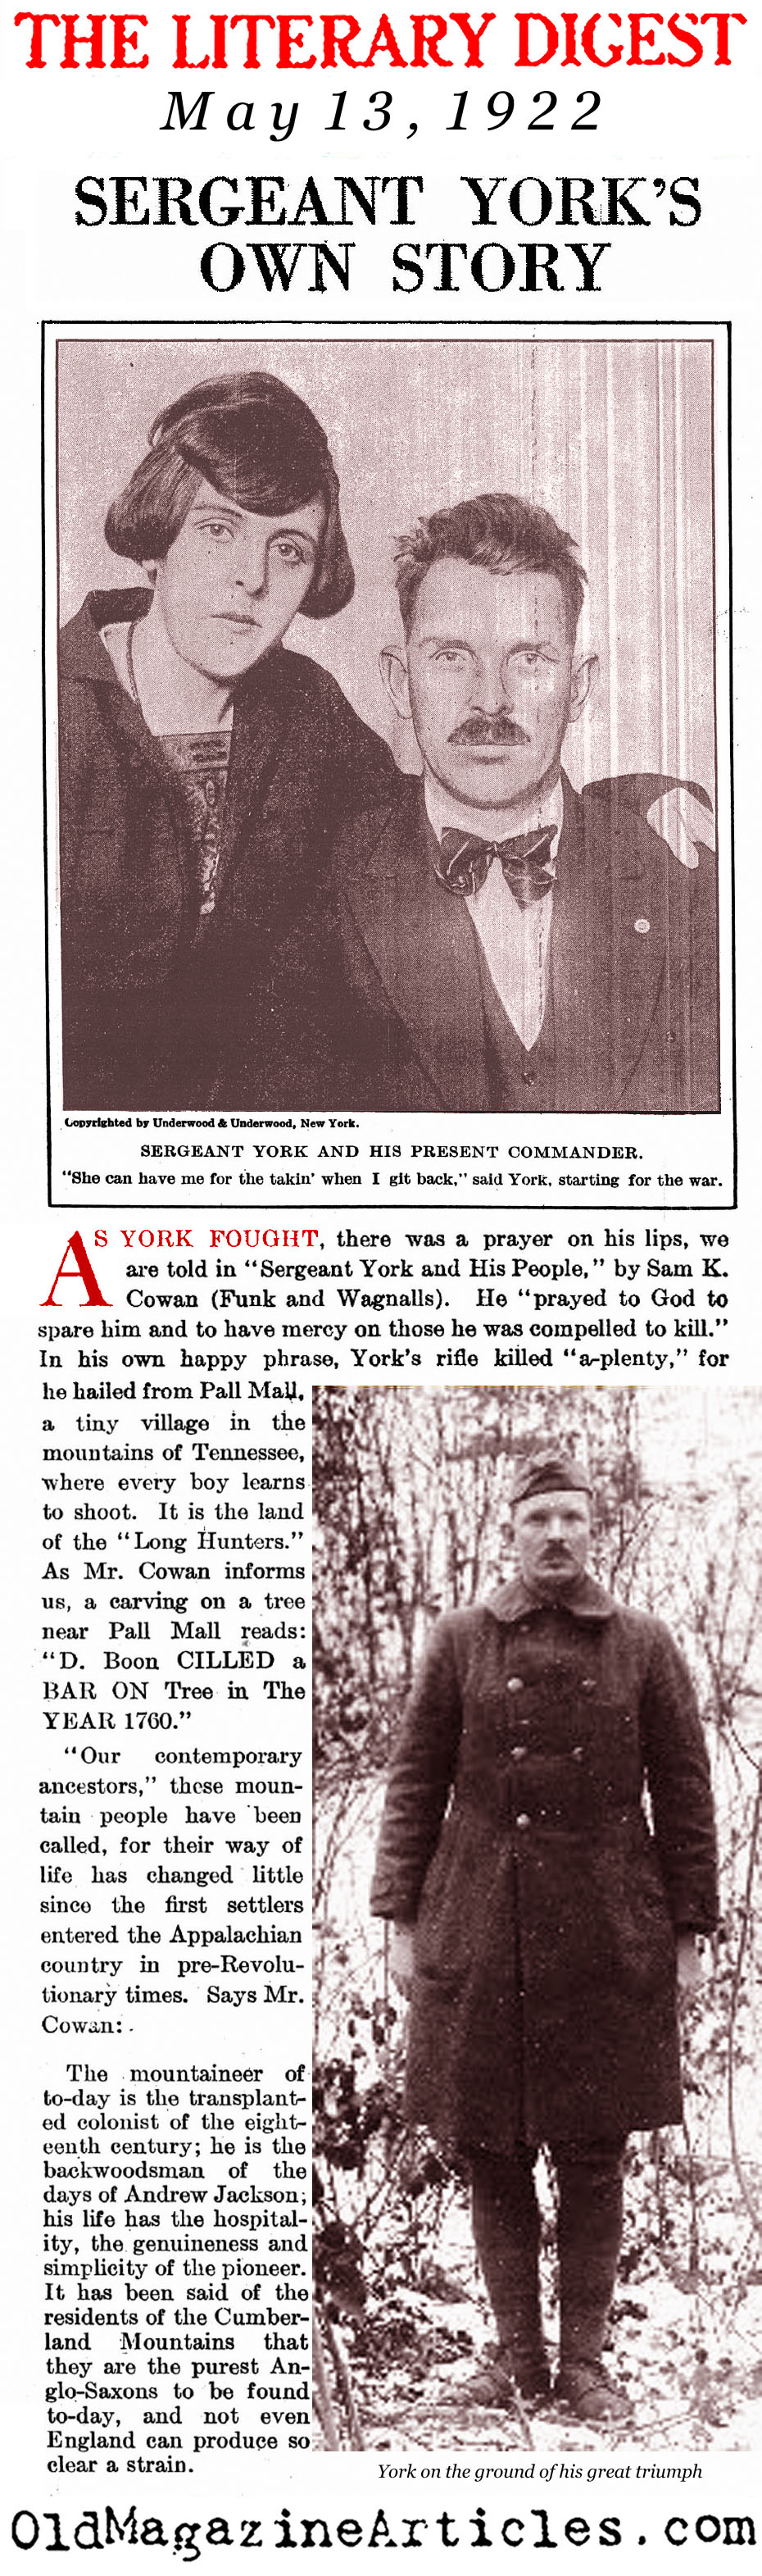 Sergeant York's Side of the Story (Literary Digest, 1922)